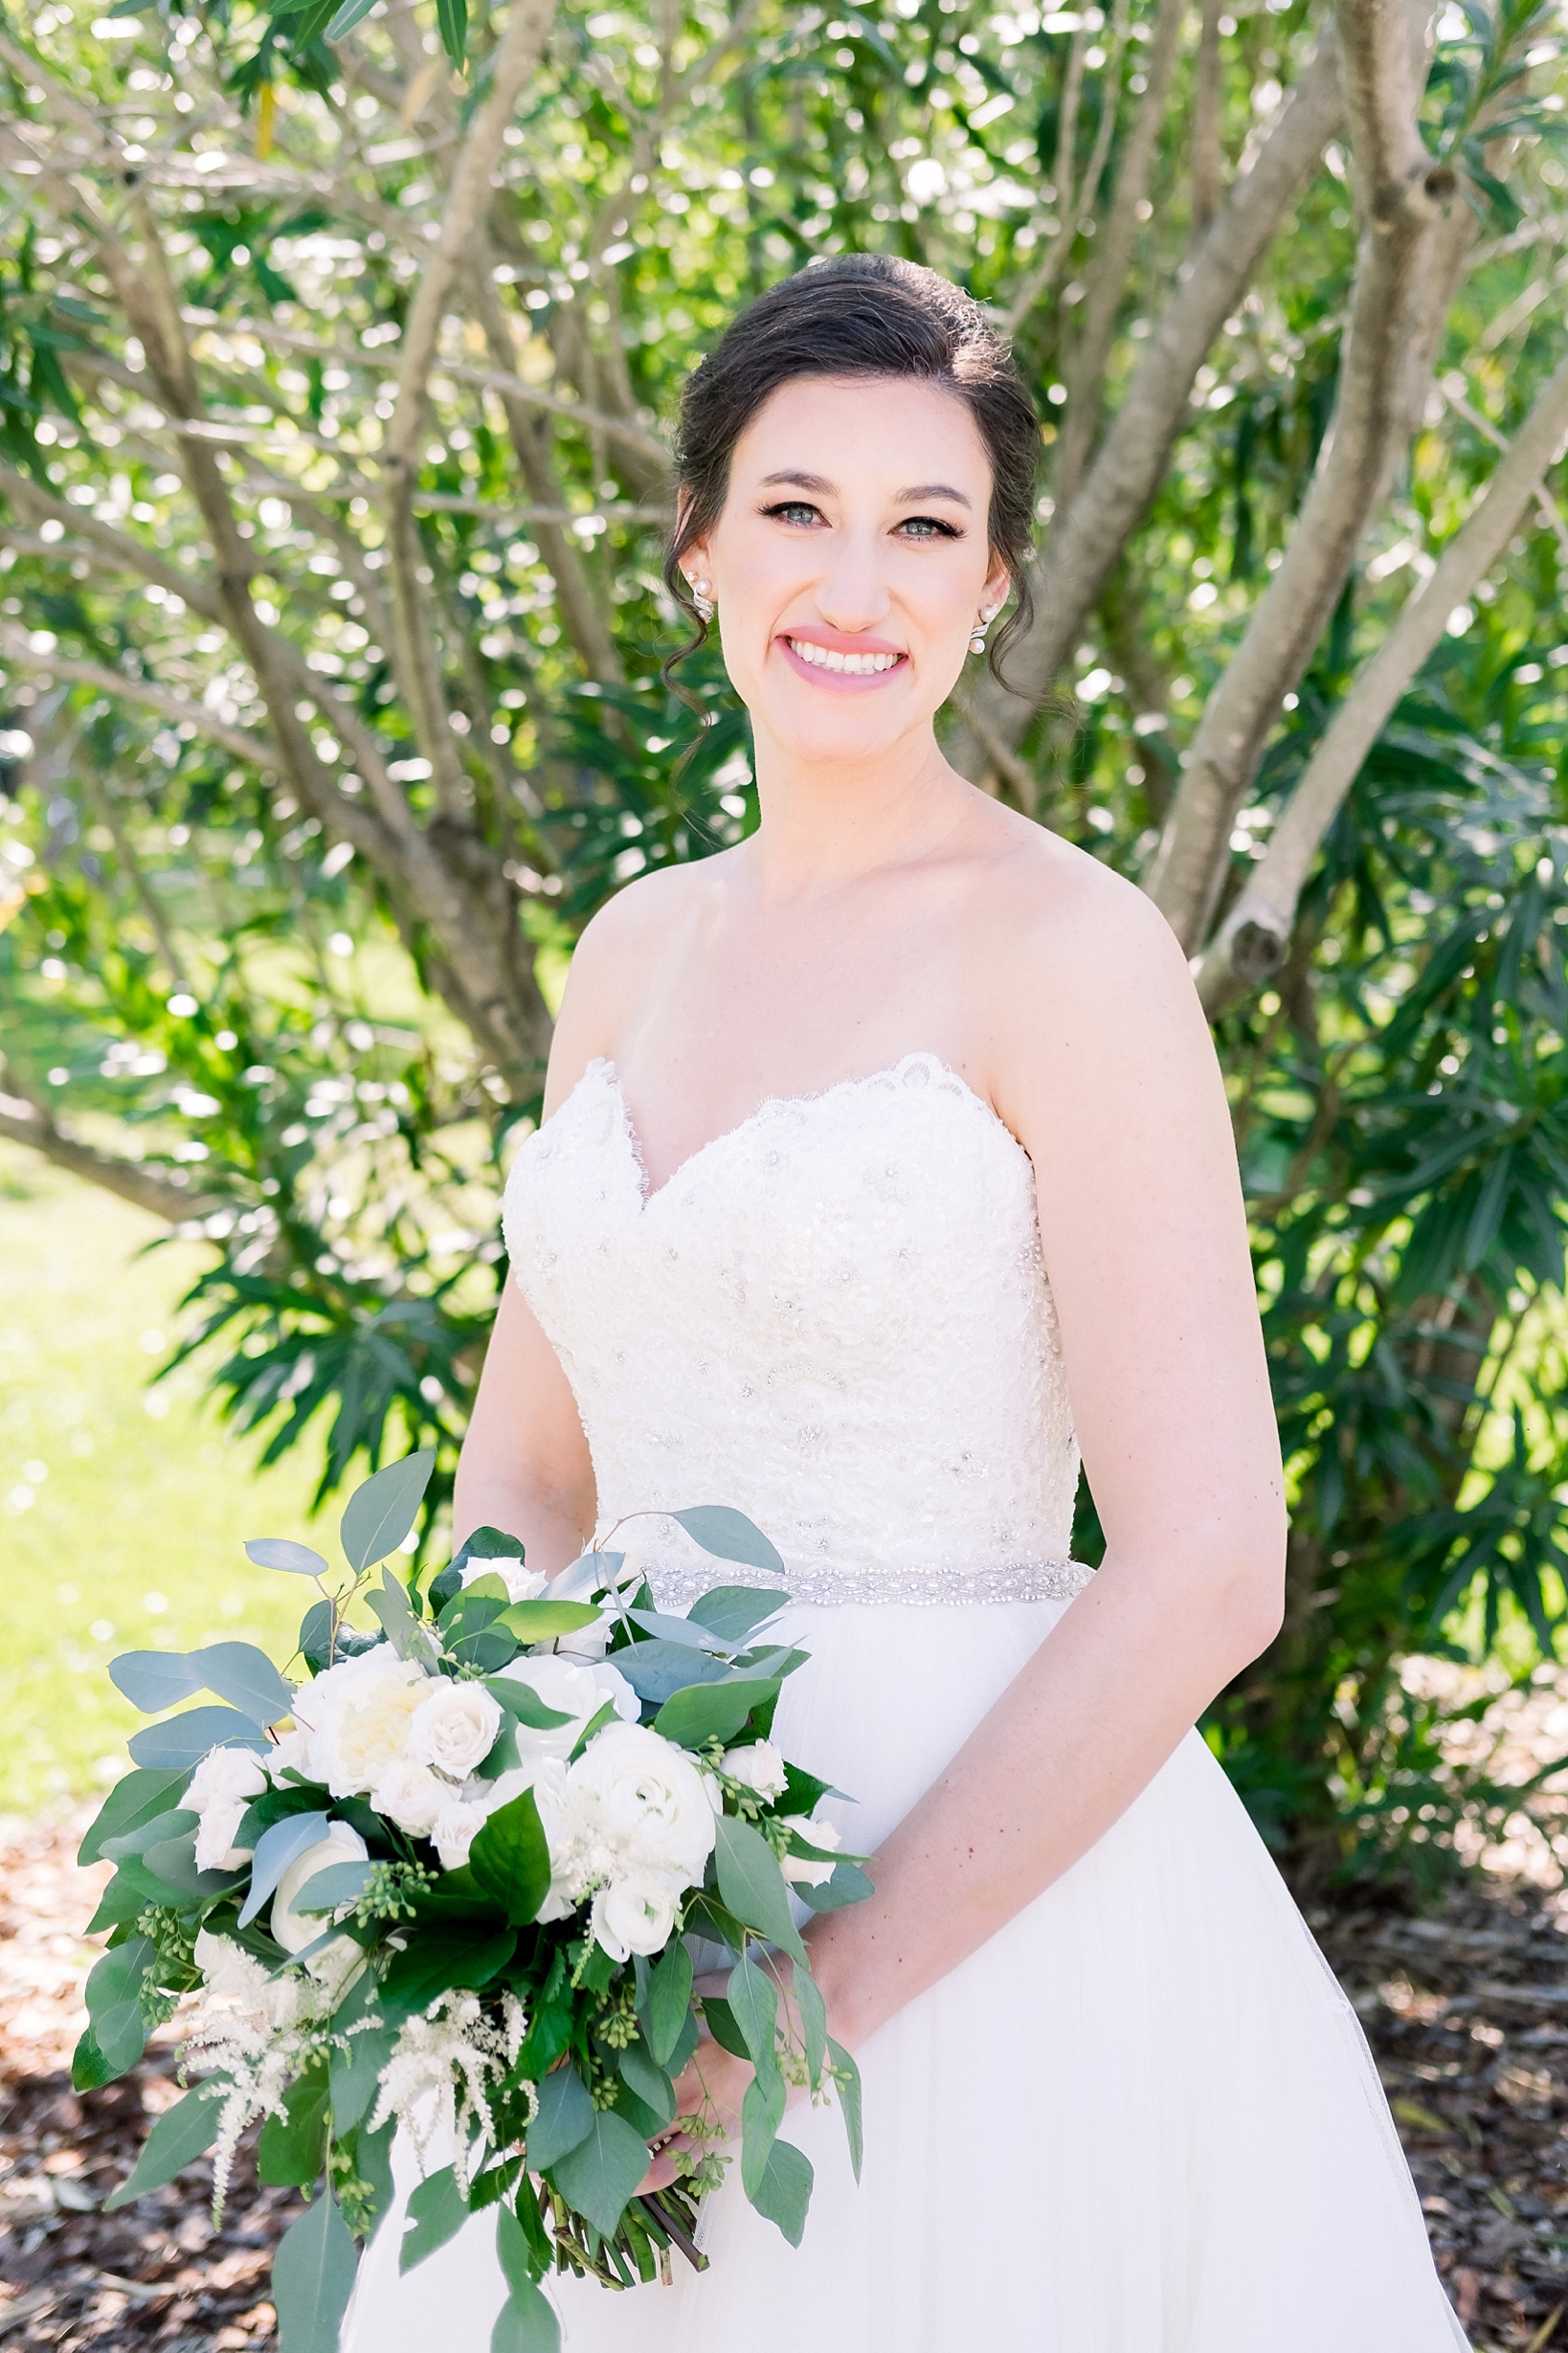 Solo portrait of the bride on her wedding day in the gardens of downtown Tampa, FL